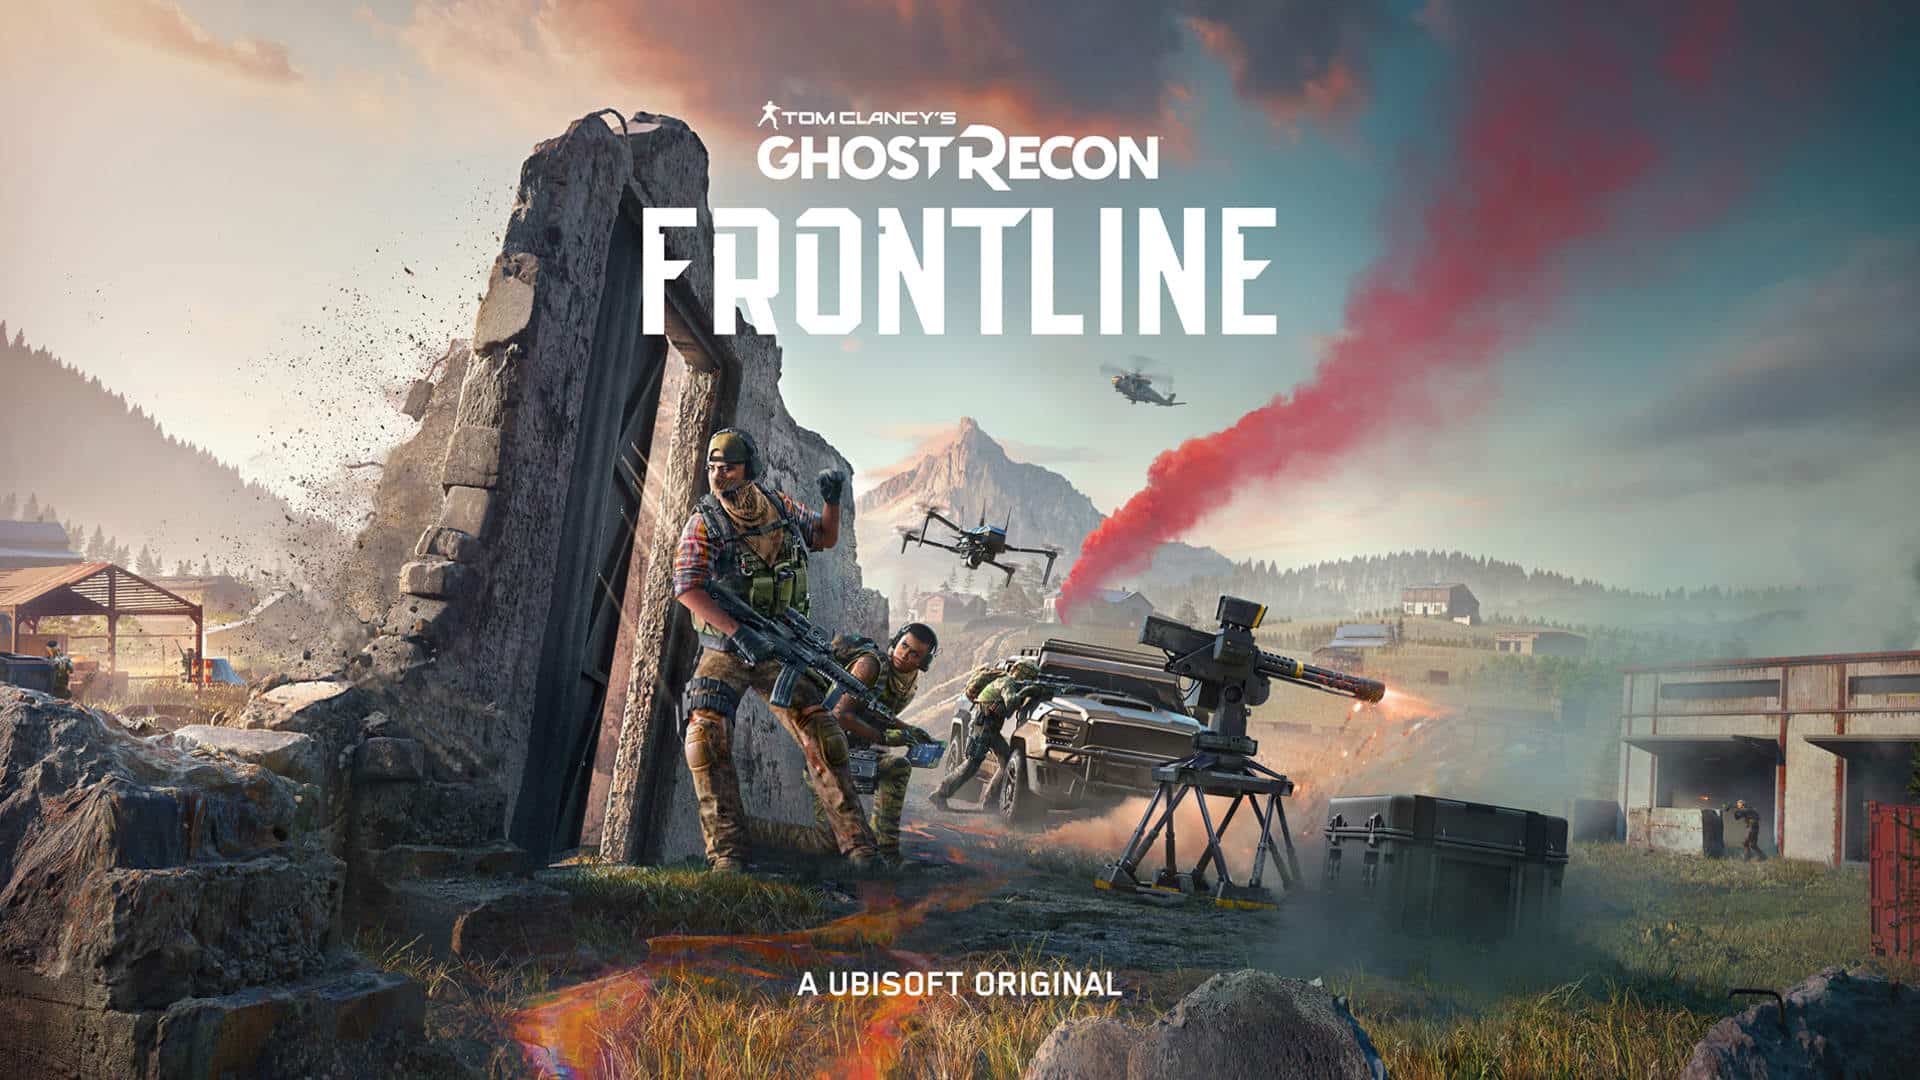 Ghost Recon Frontline Cancelled at Ubisoft